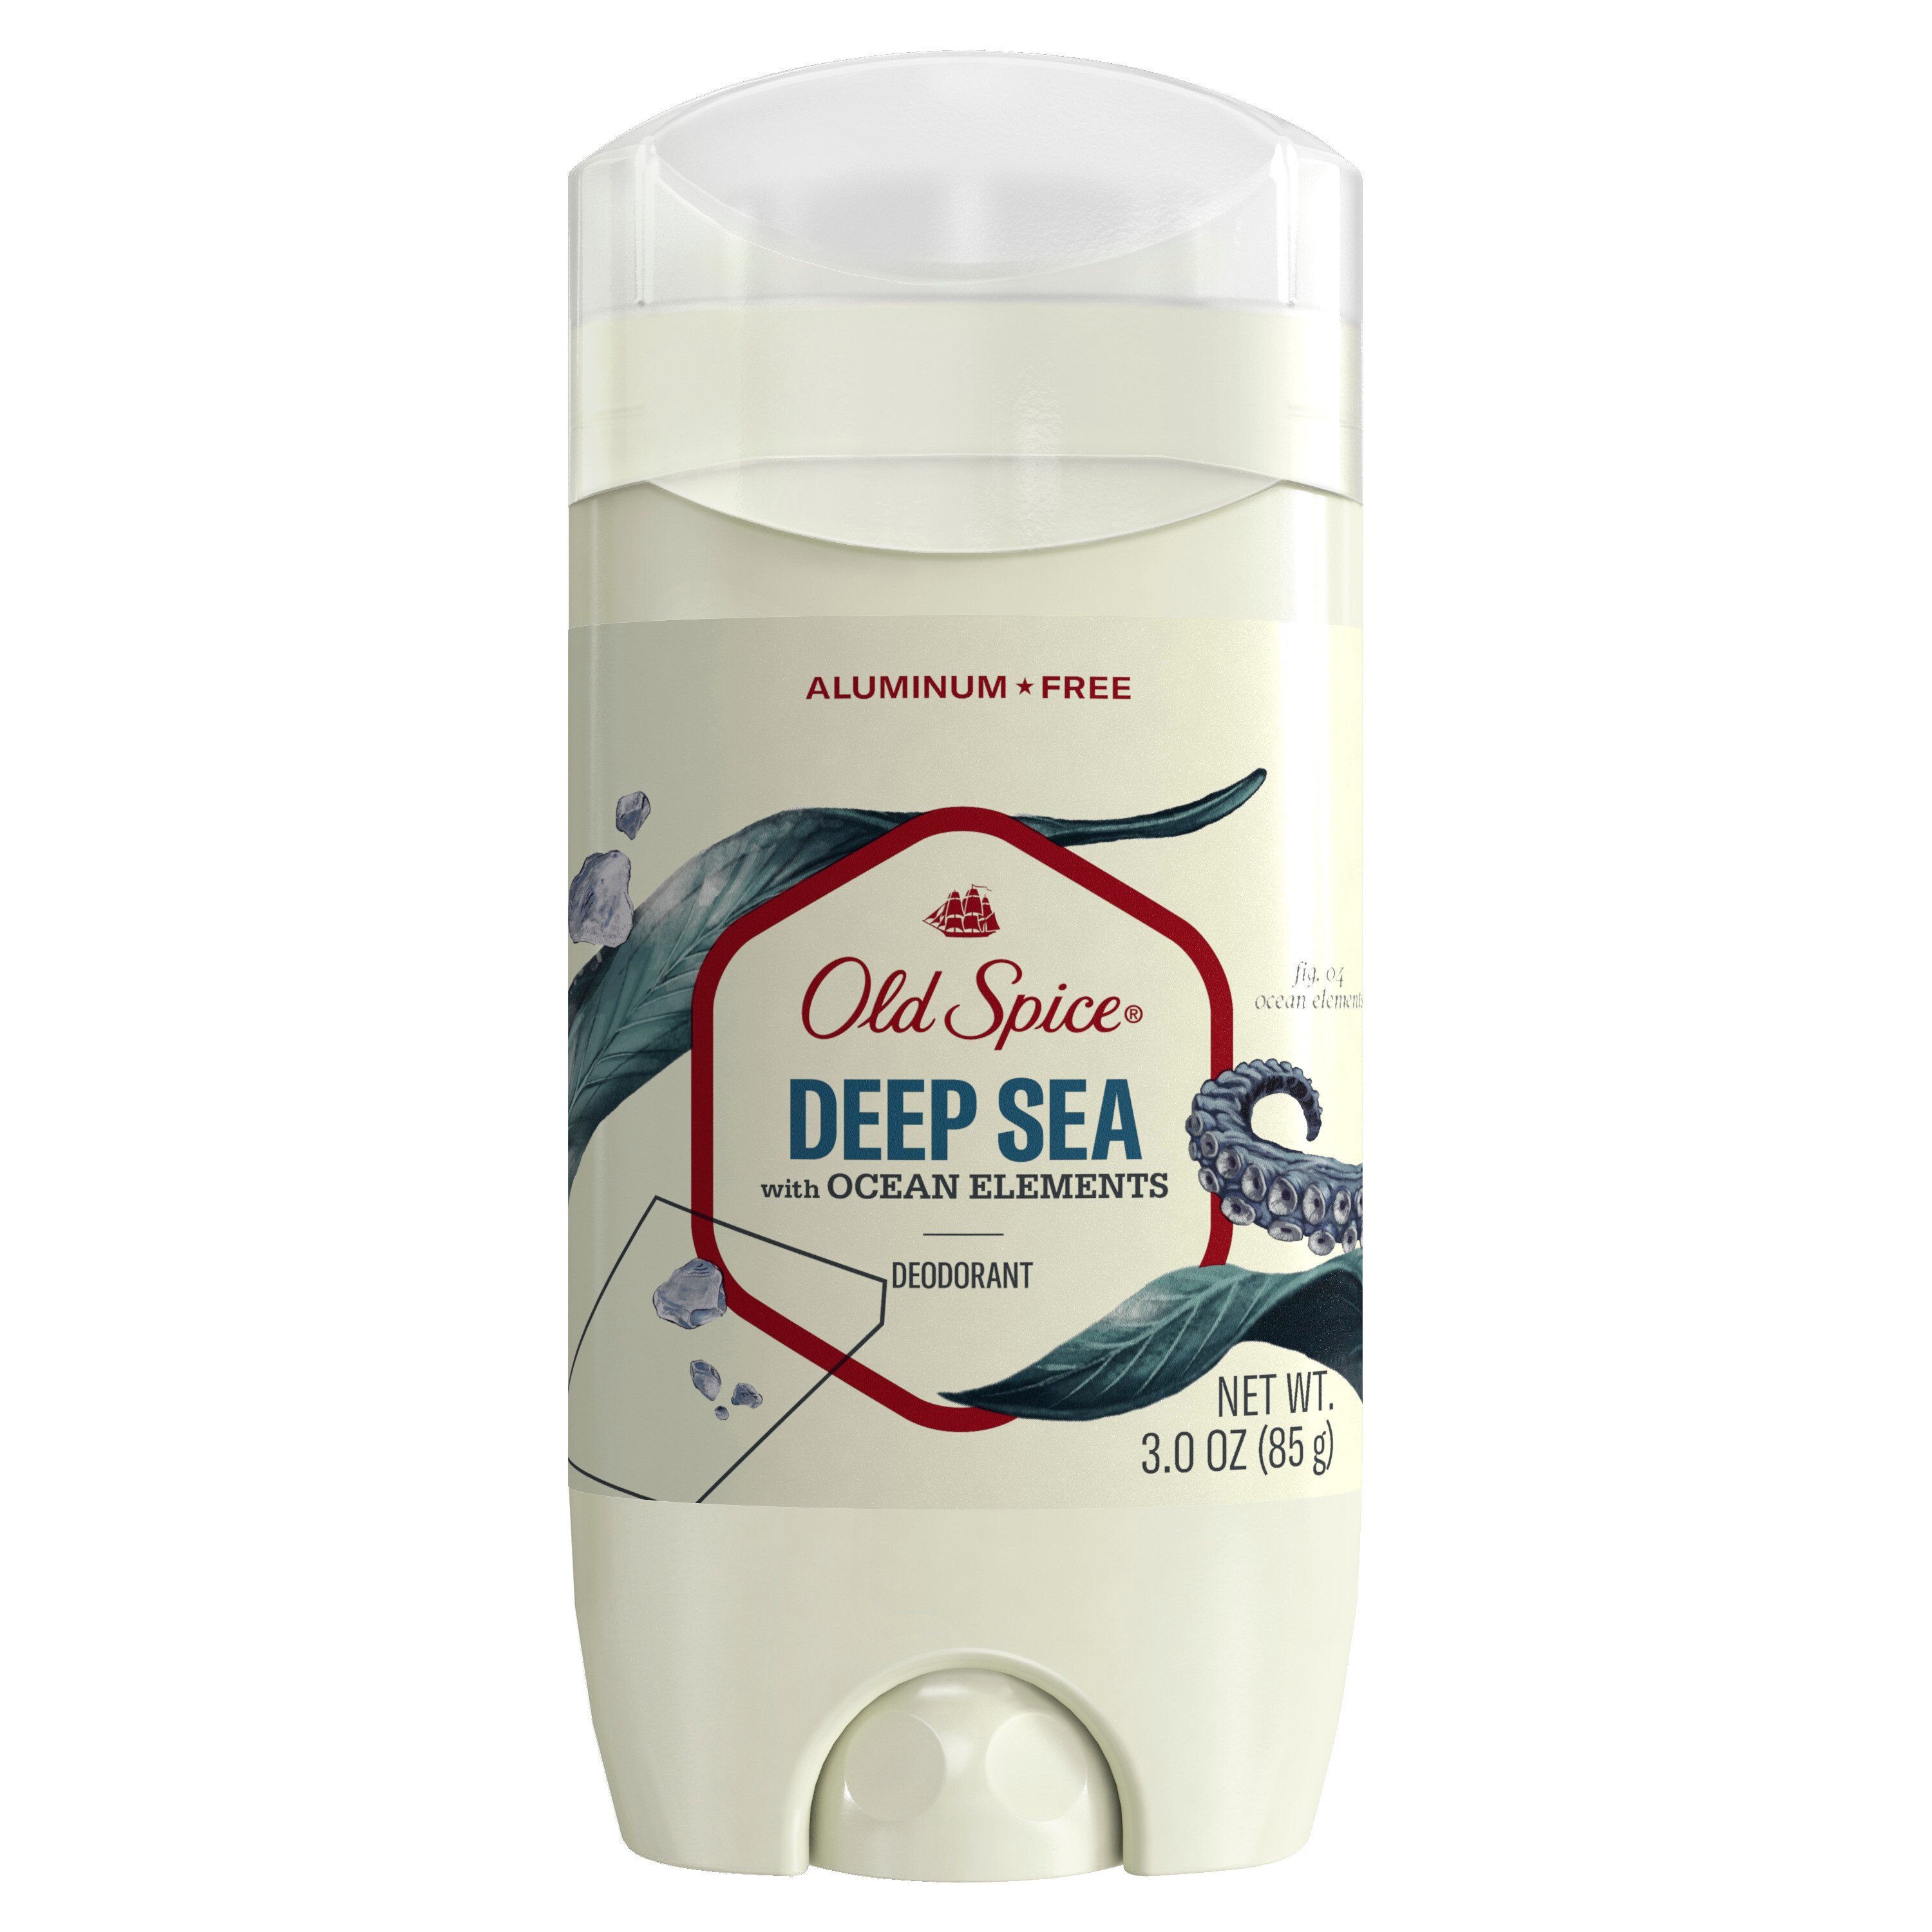  Old Spice Deodorant for Men Deep Sea with Ocean Elements Scent, 3 OZ 